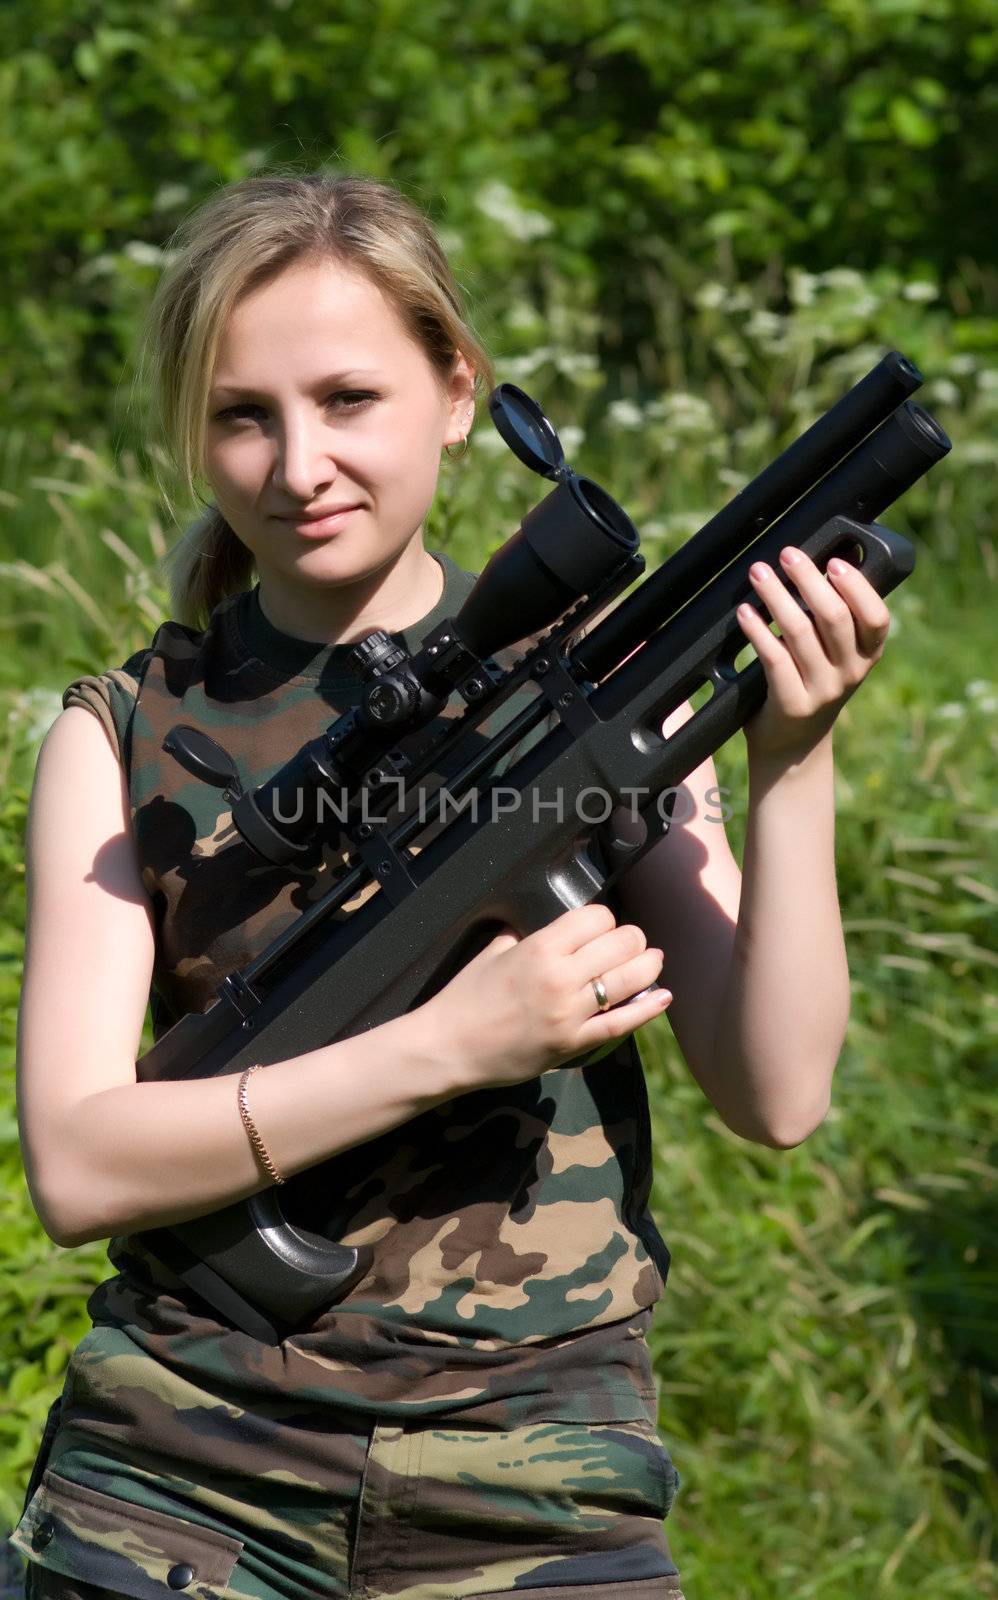 The nice young fair-haired girl with an air rifle.